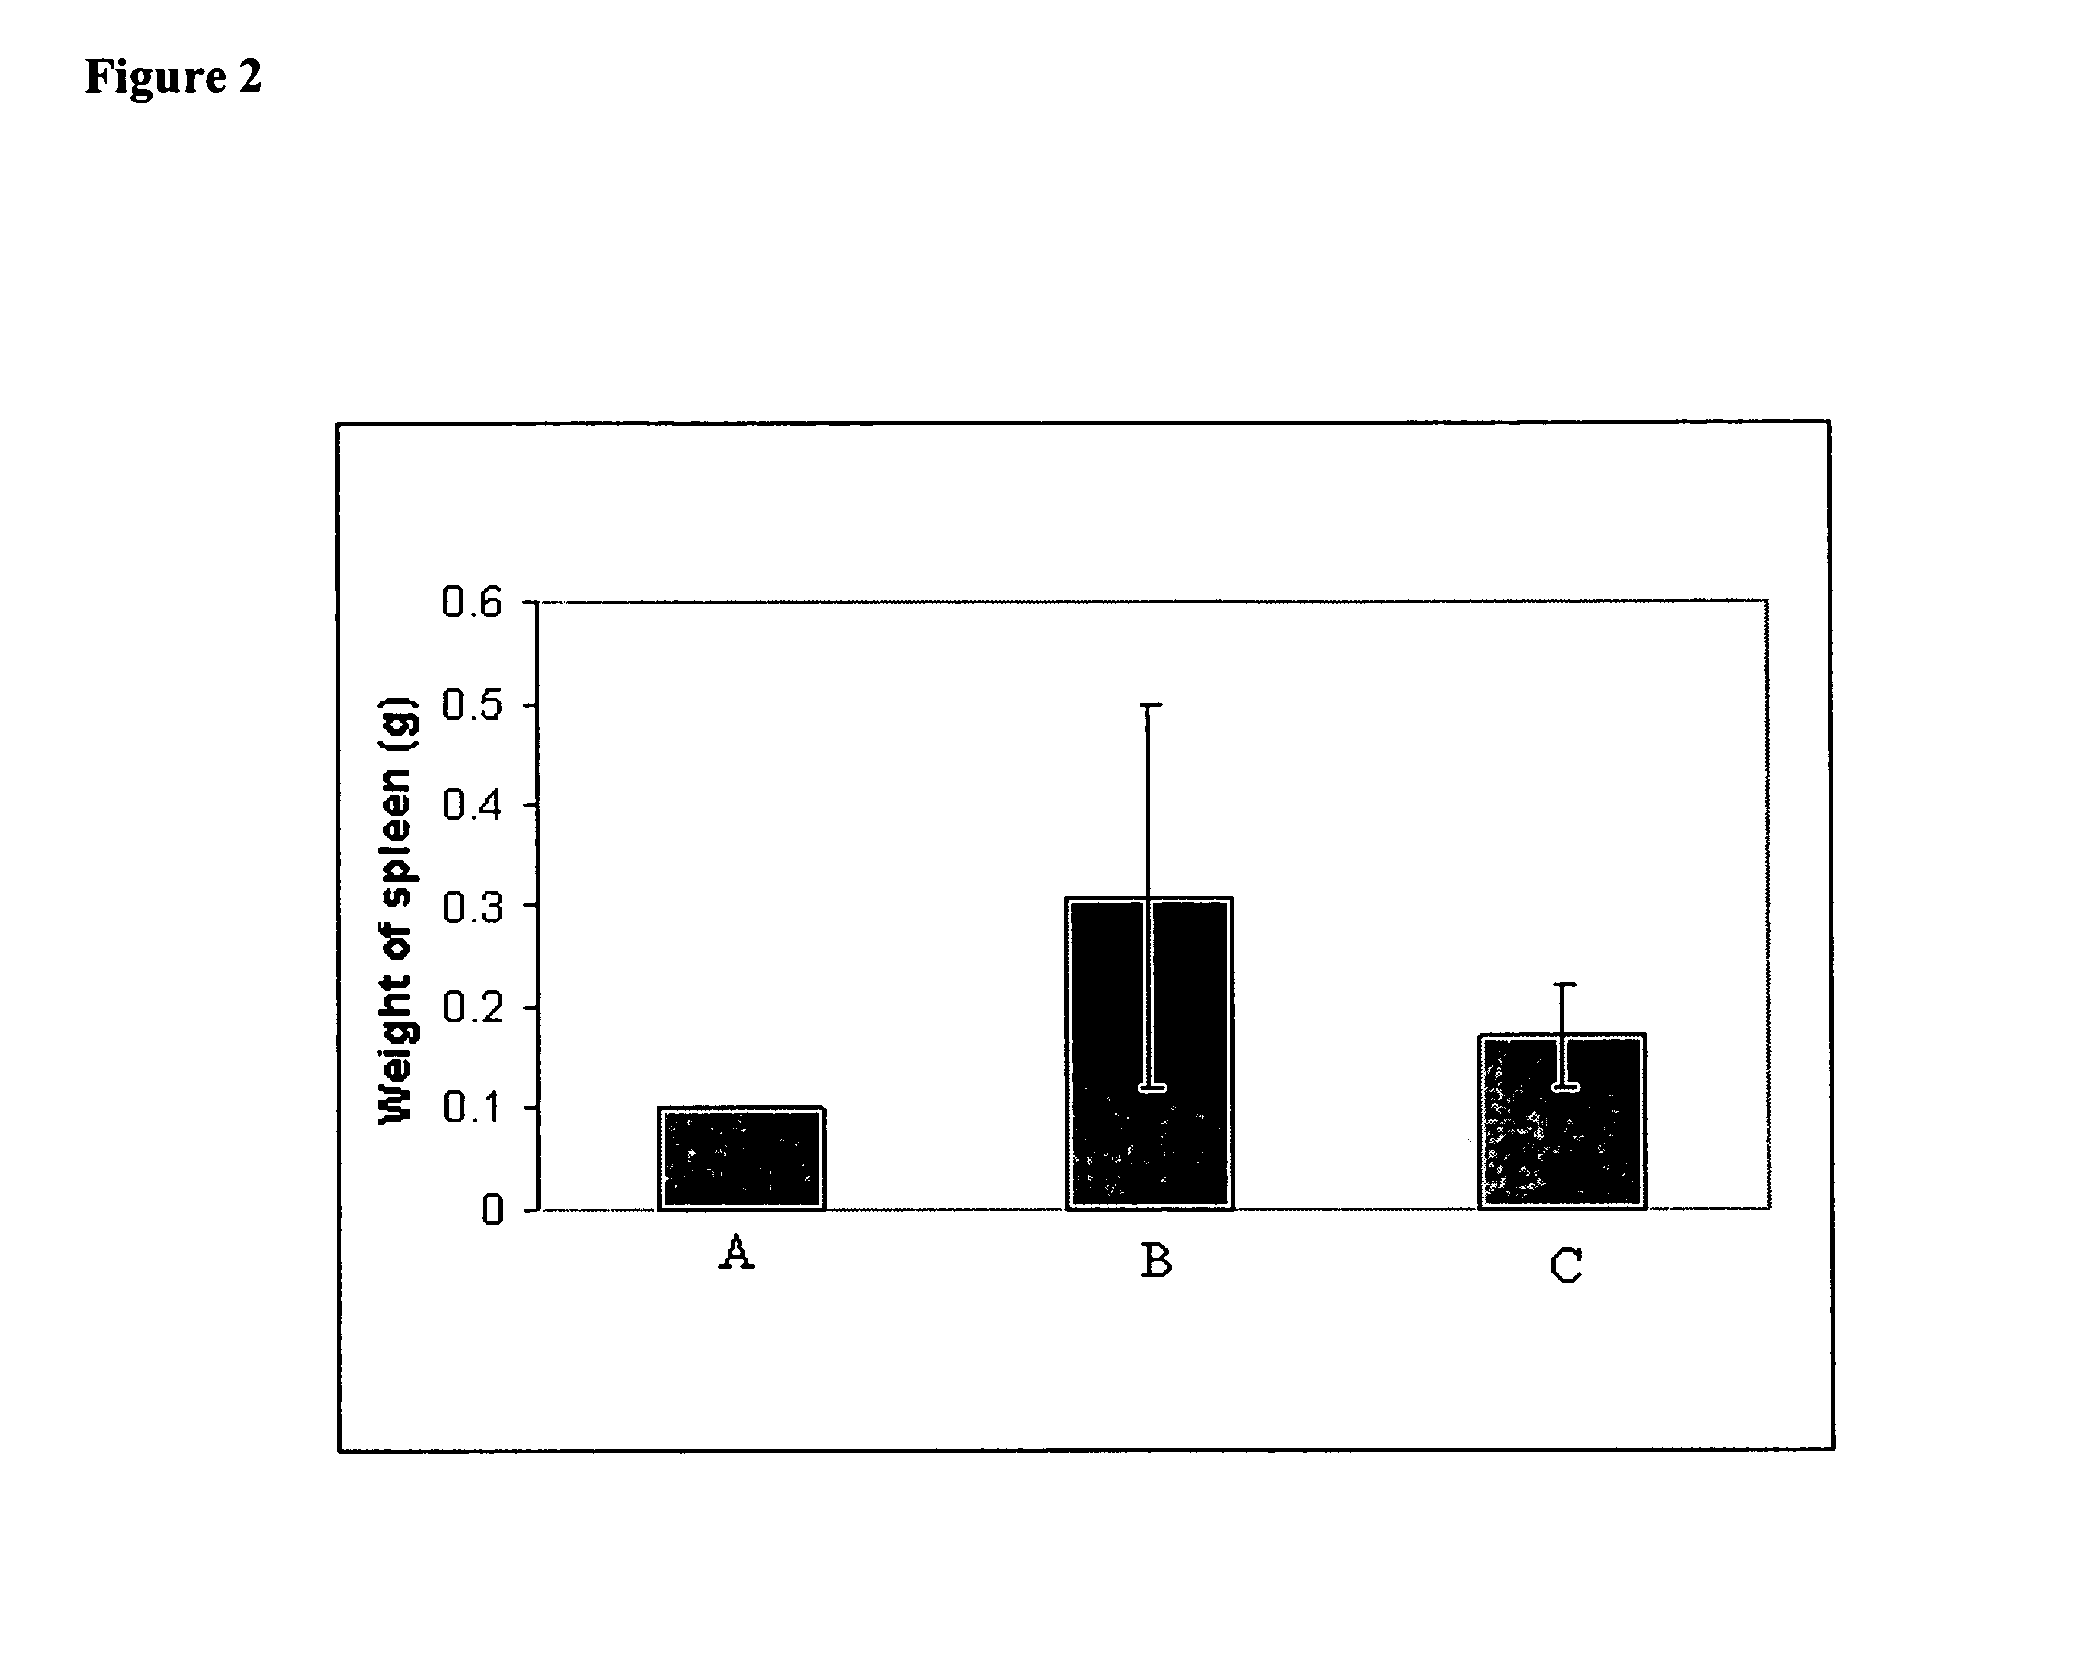 Methods of treating cancer with high potency lipid-based platinum compound formulations administered intravenously